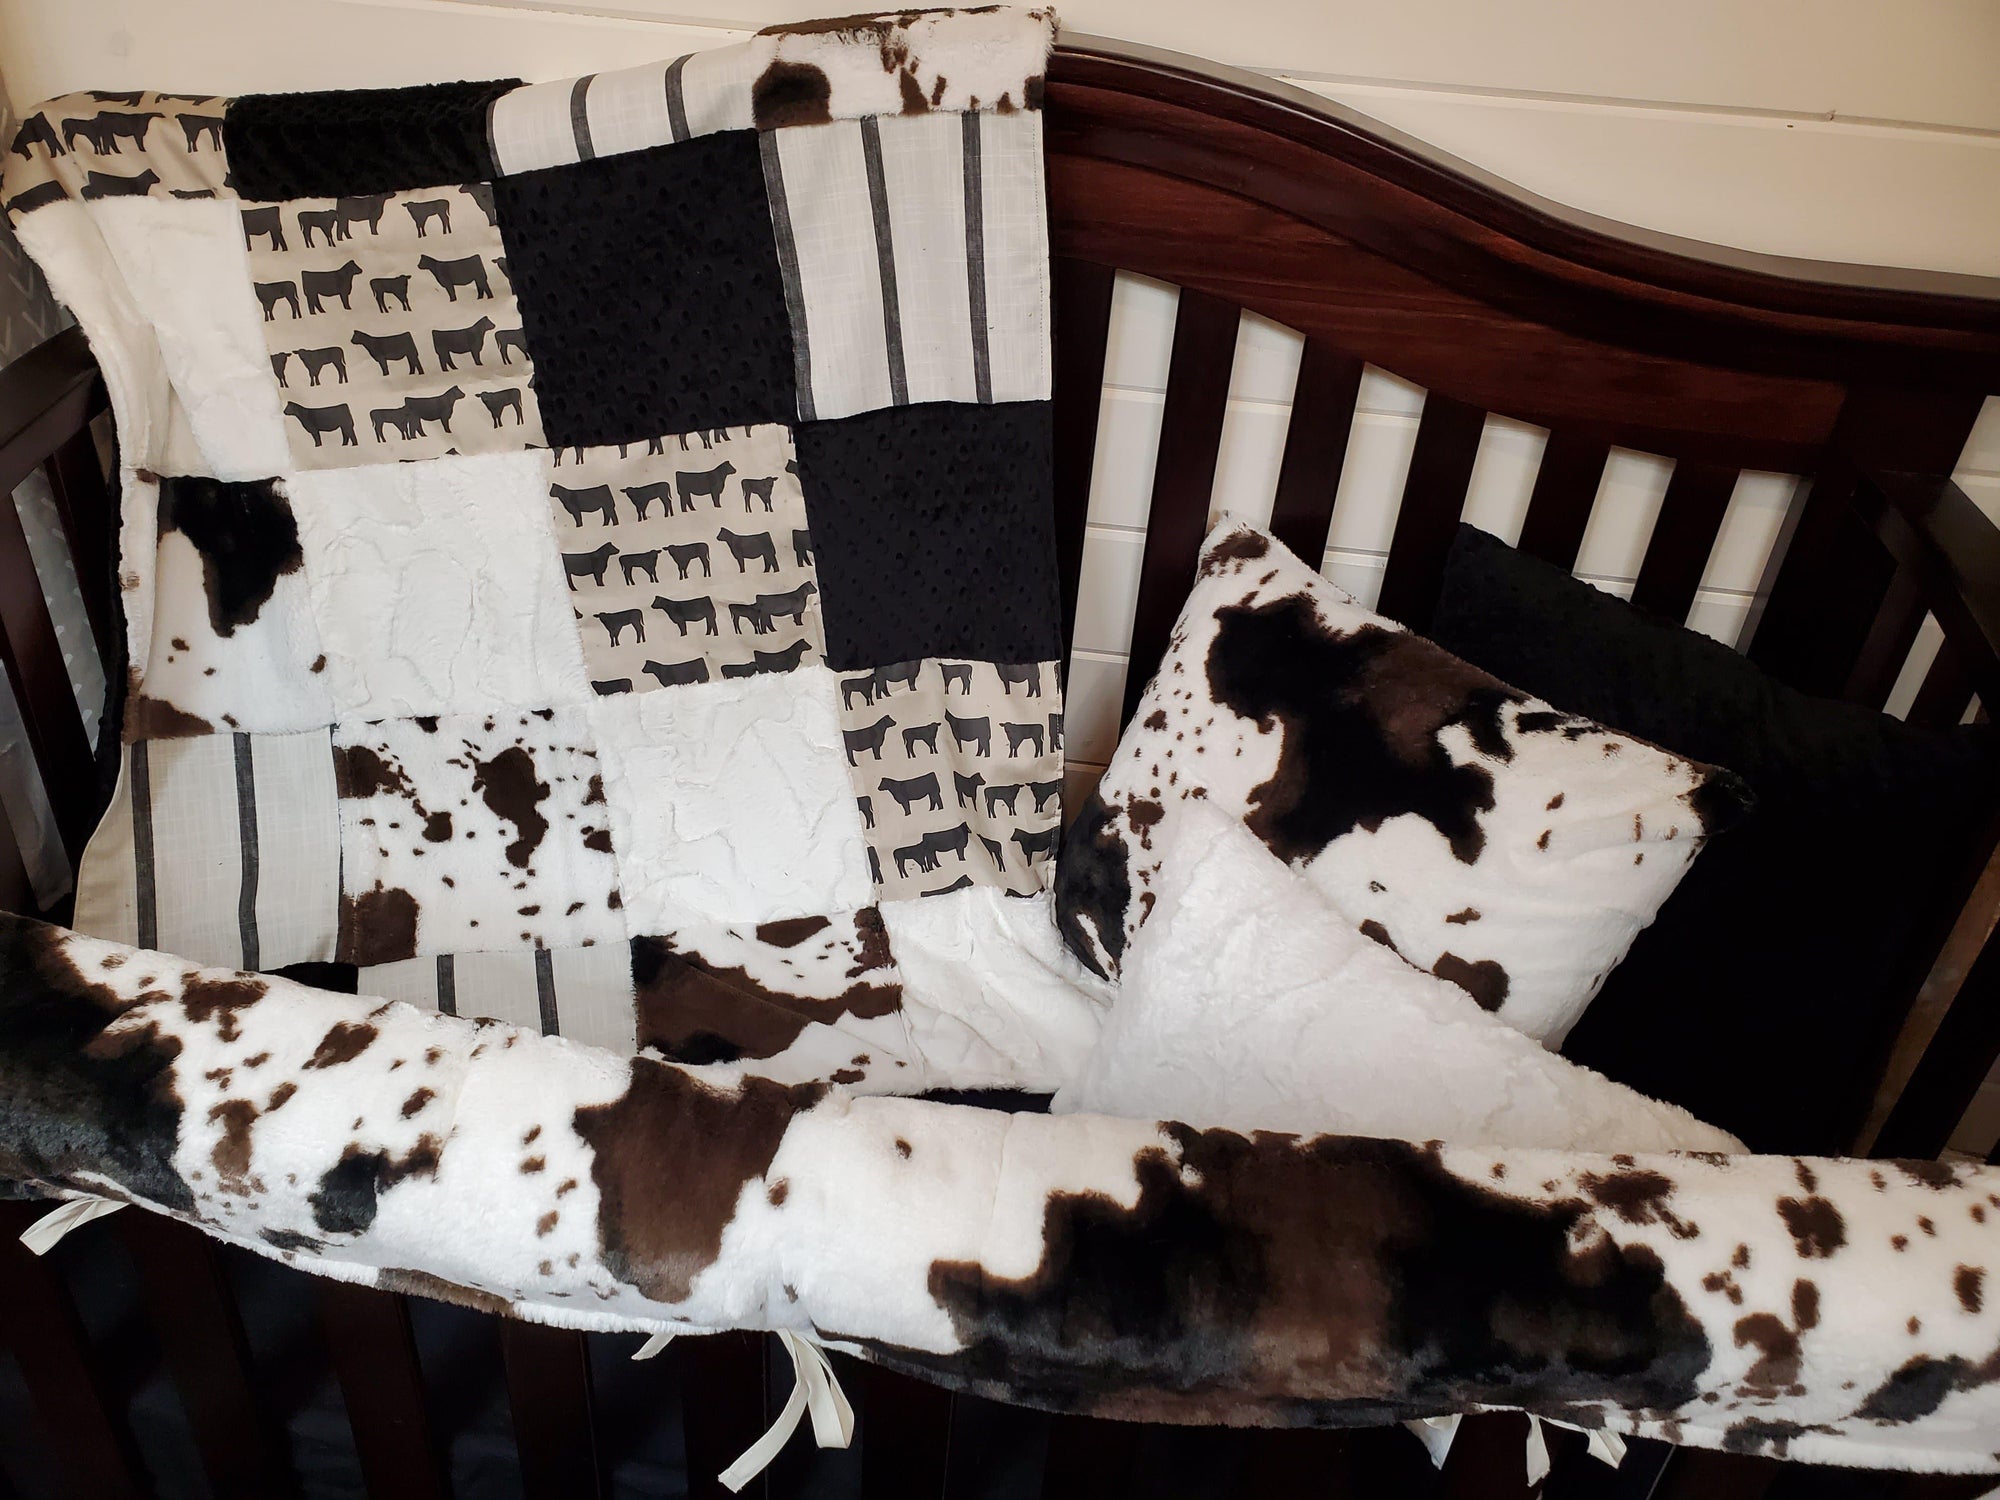 cow baby bedding